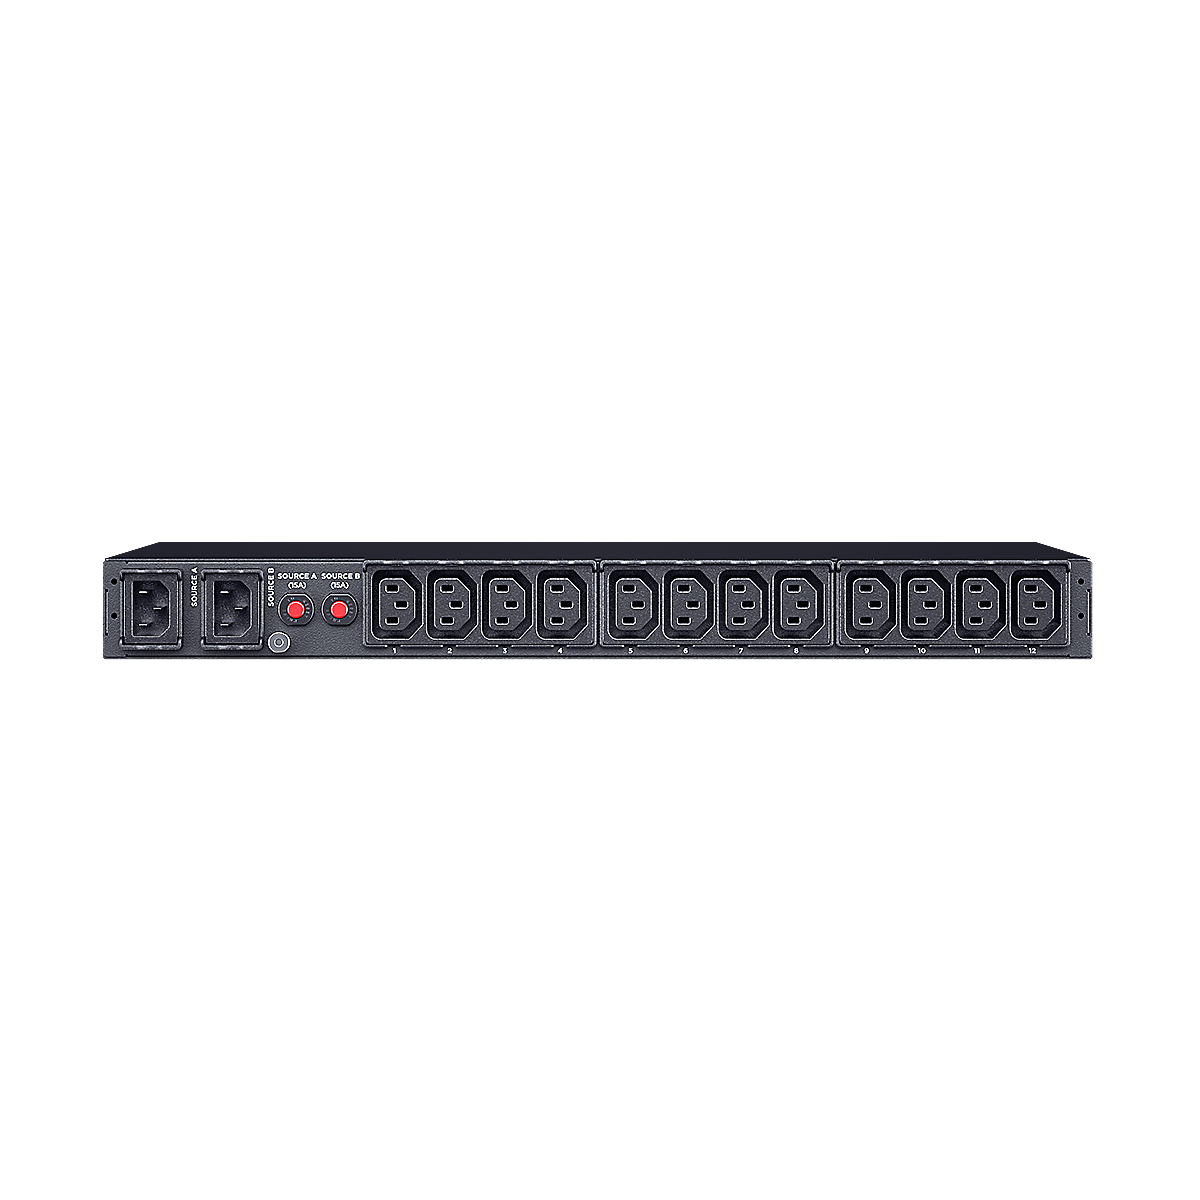 CyberPower Systems Power Distribution Unit - PDU24004